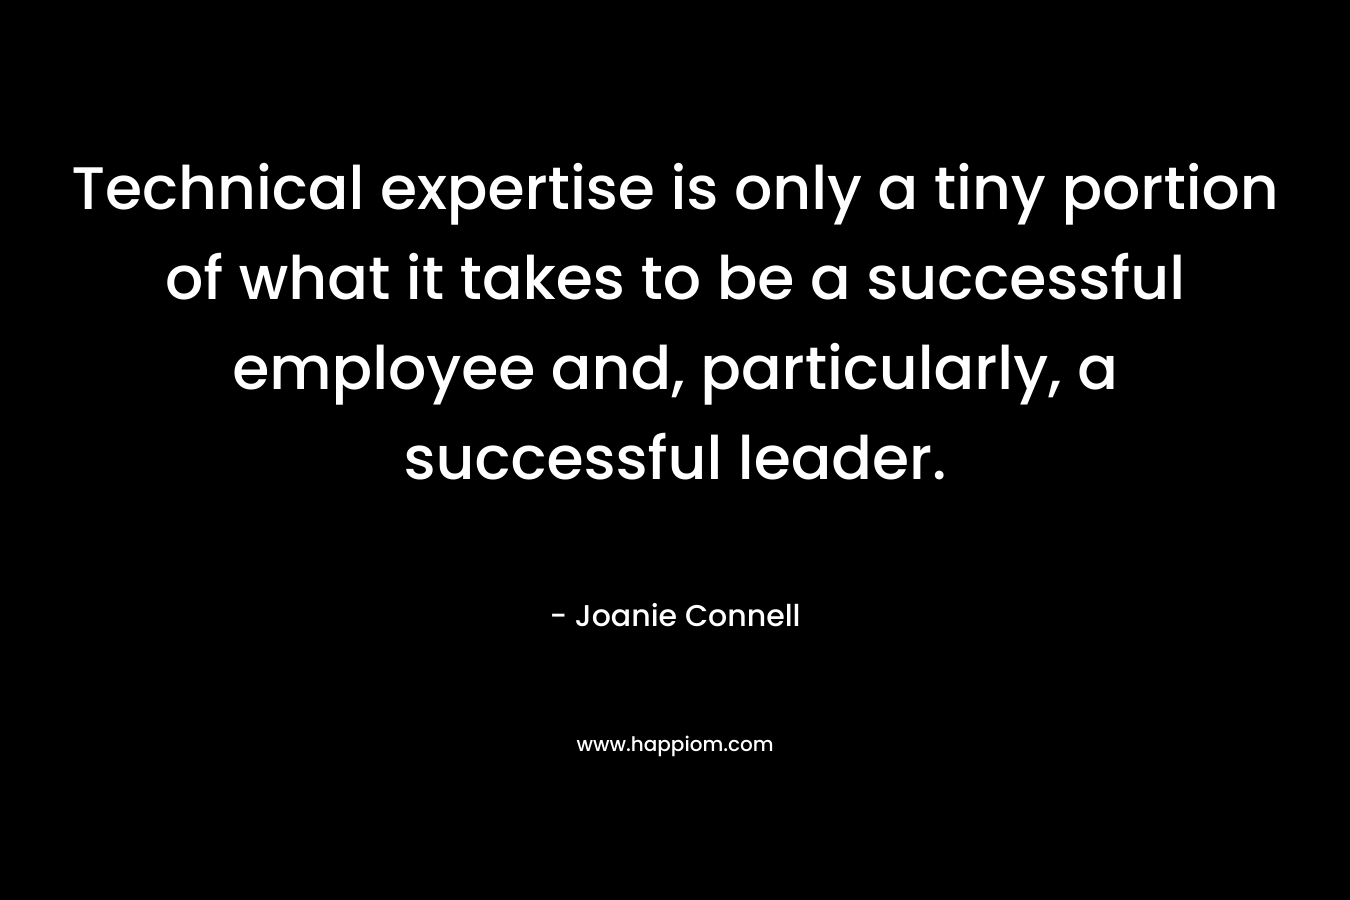 Technical expertise is only a tiny portion of what it takes to be a successful employee and, particularly, a successful leader. – Joanie Connell